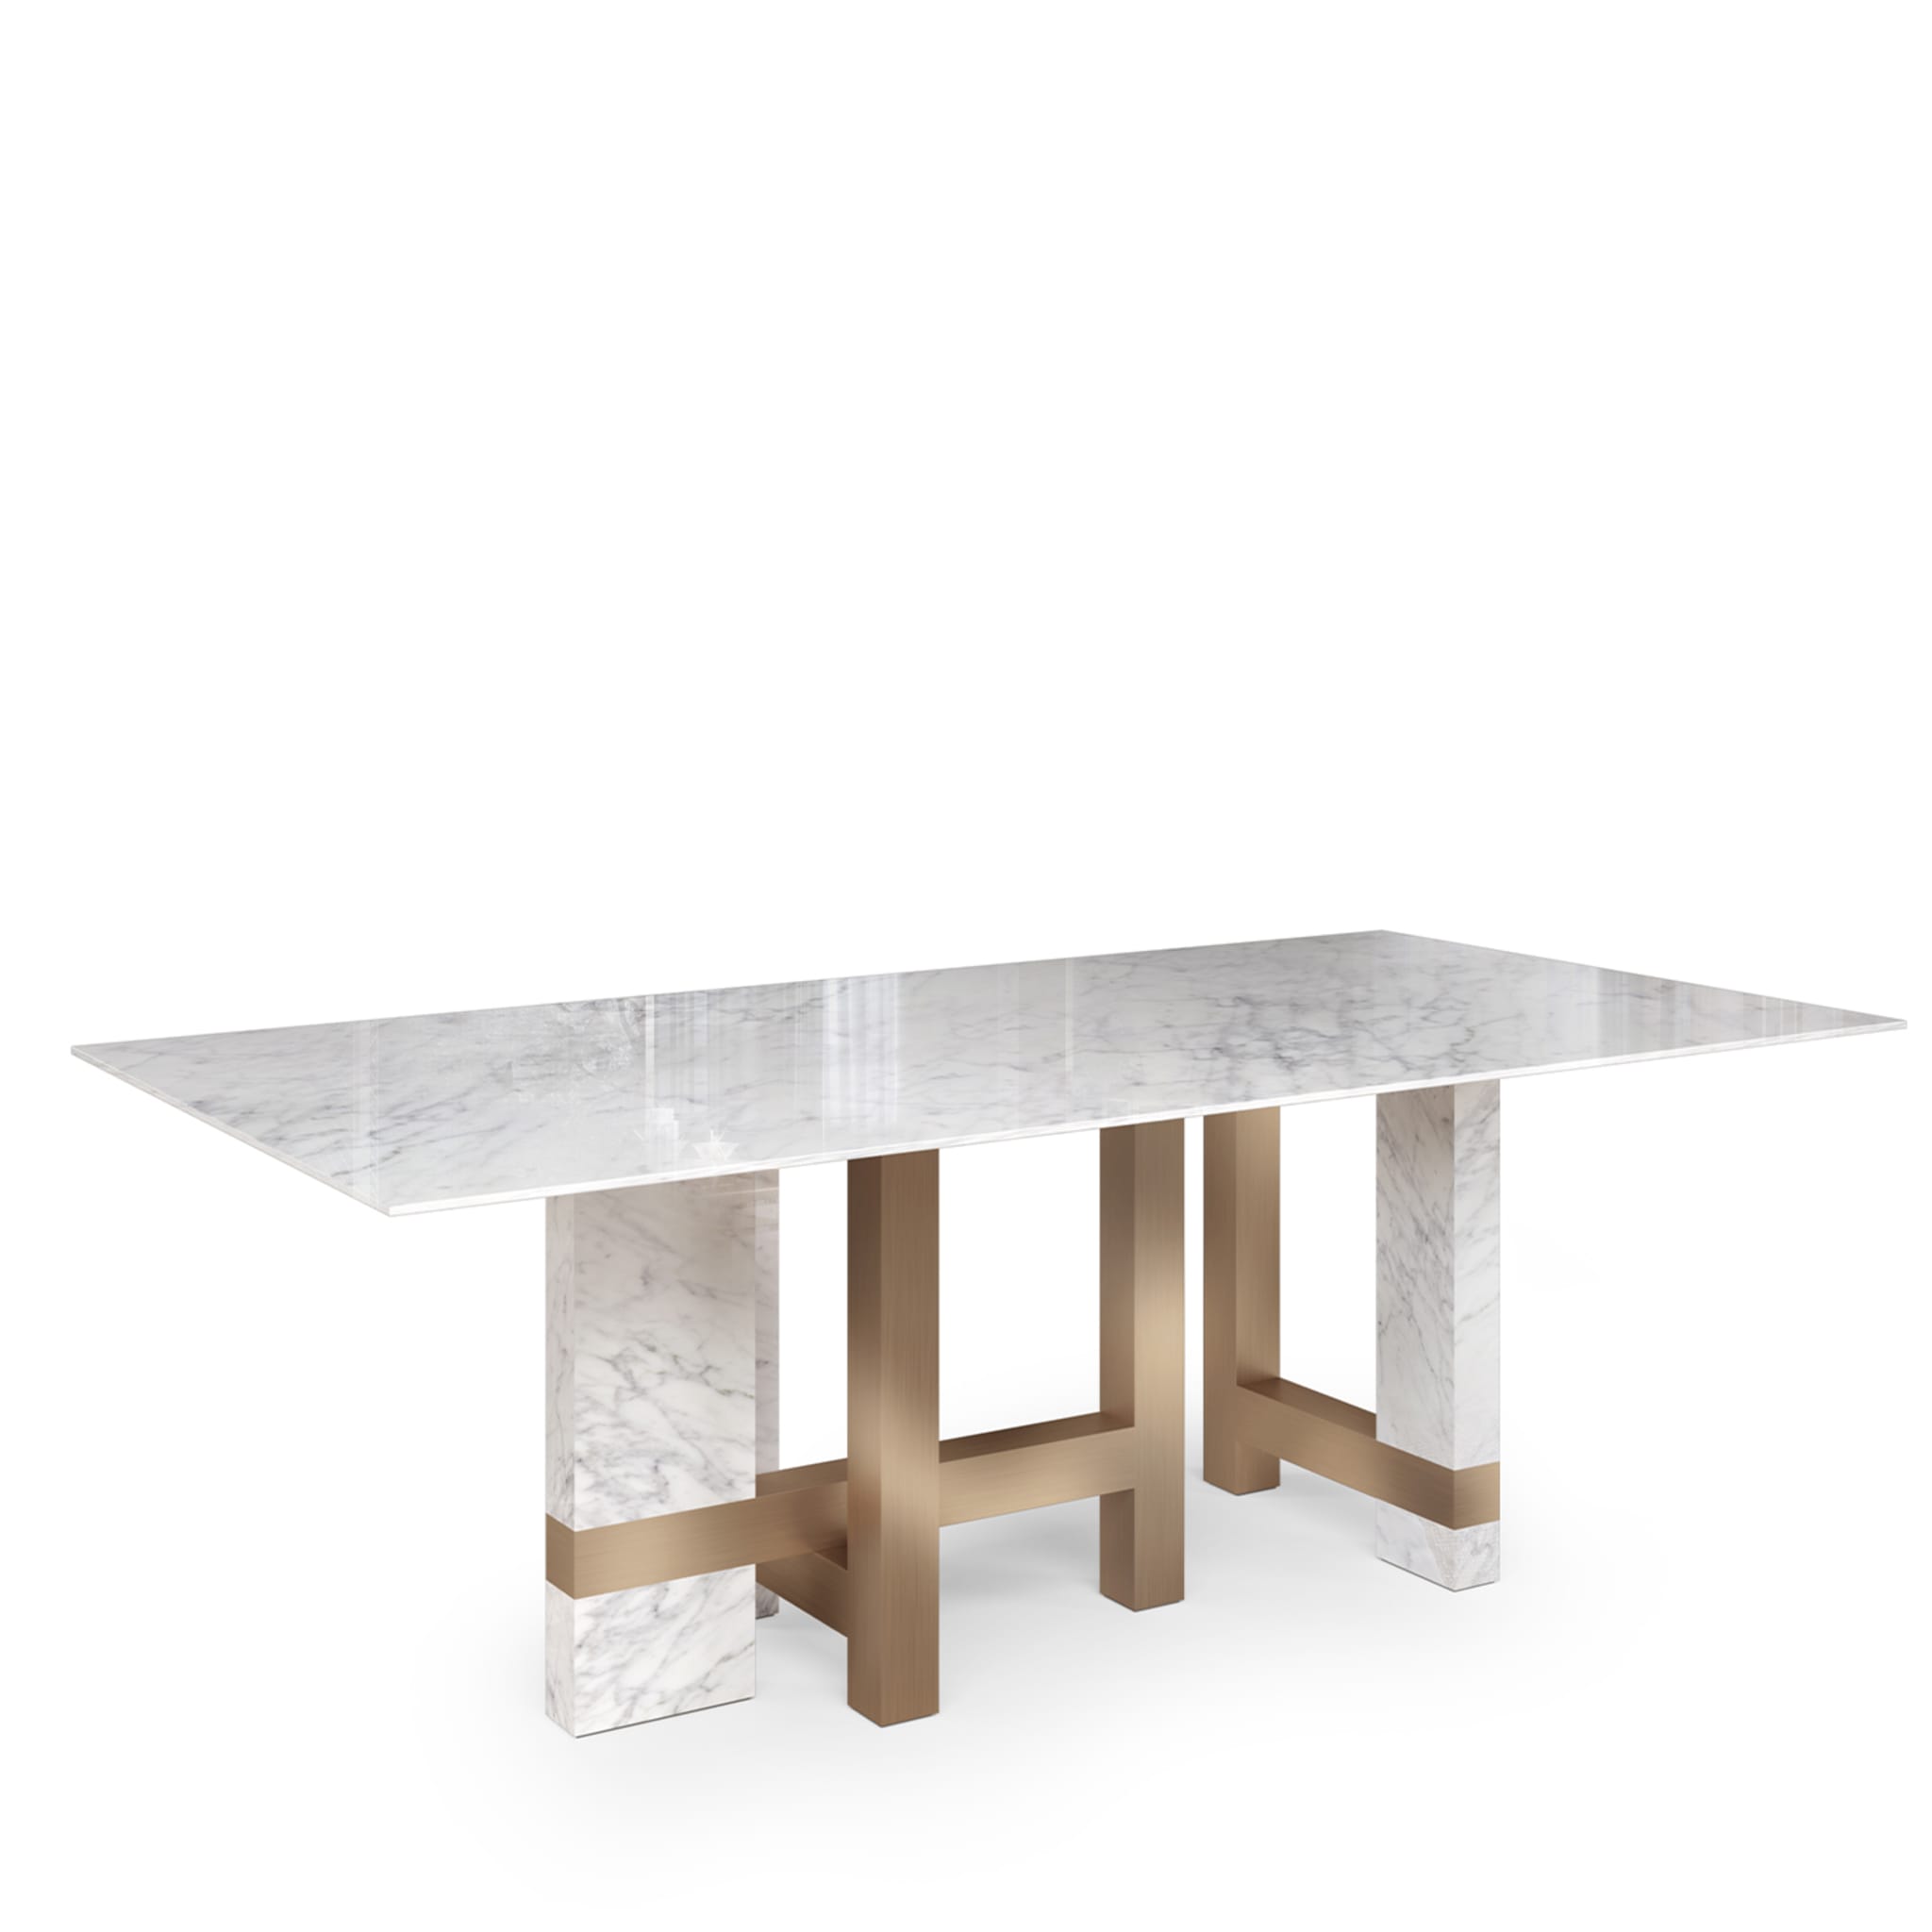 Asymmetrical Dining Table in Marble and Metal - Alternative view 1